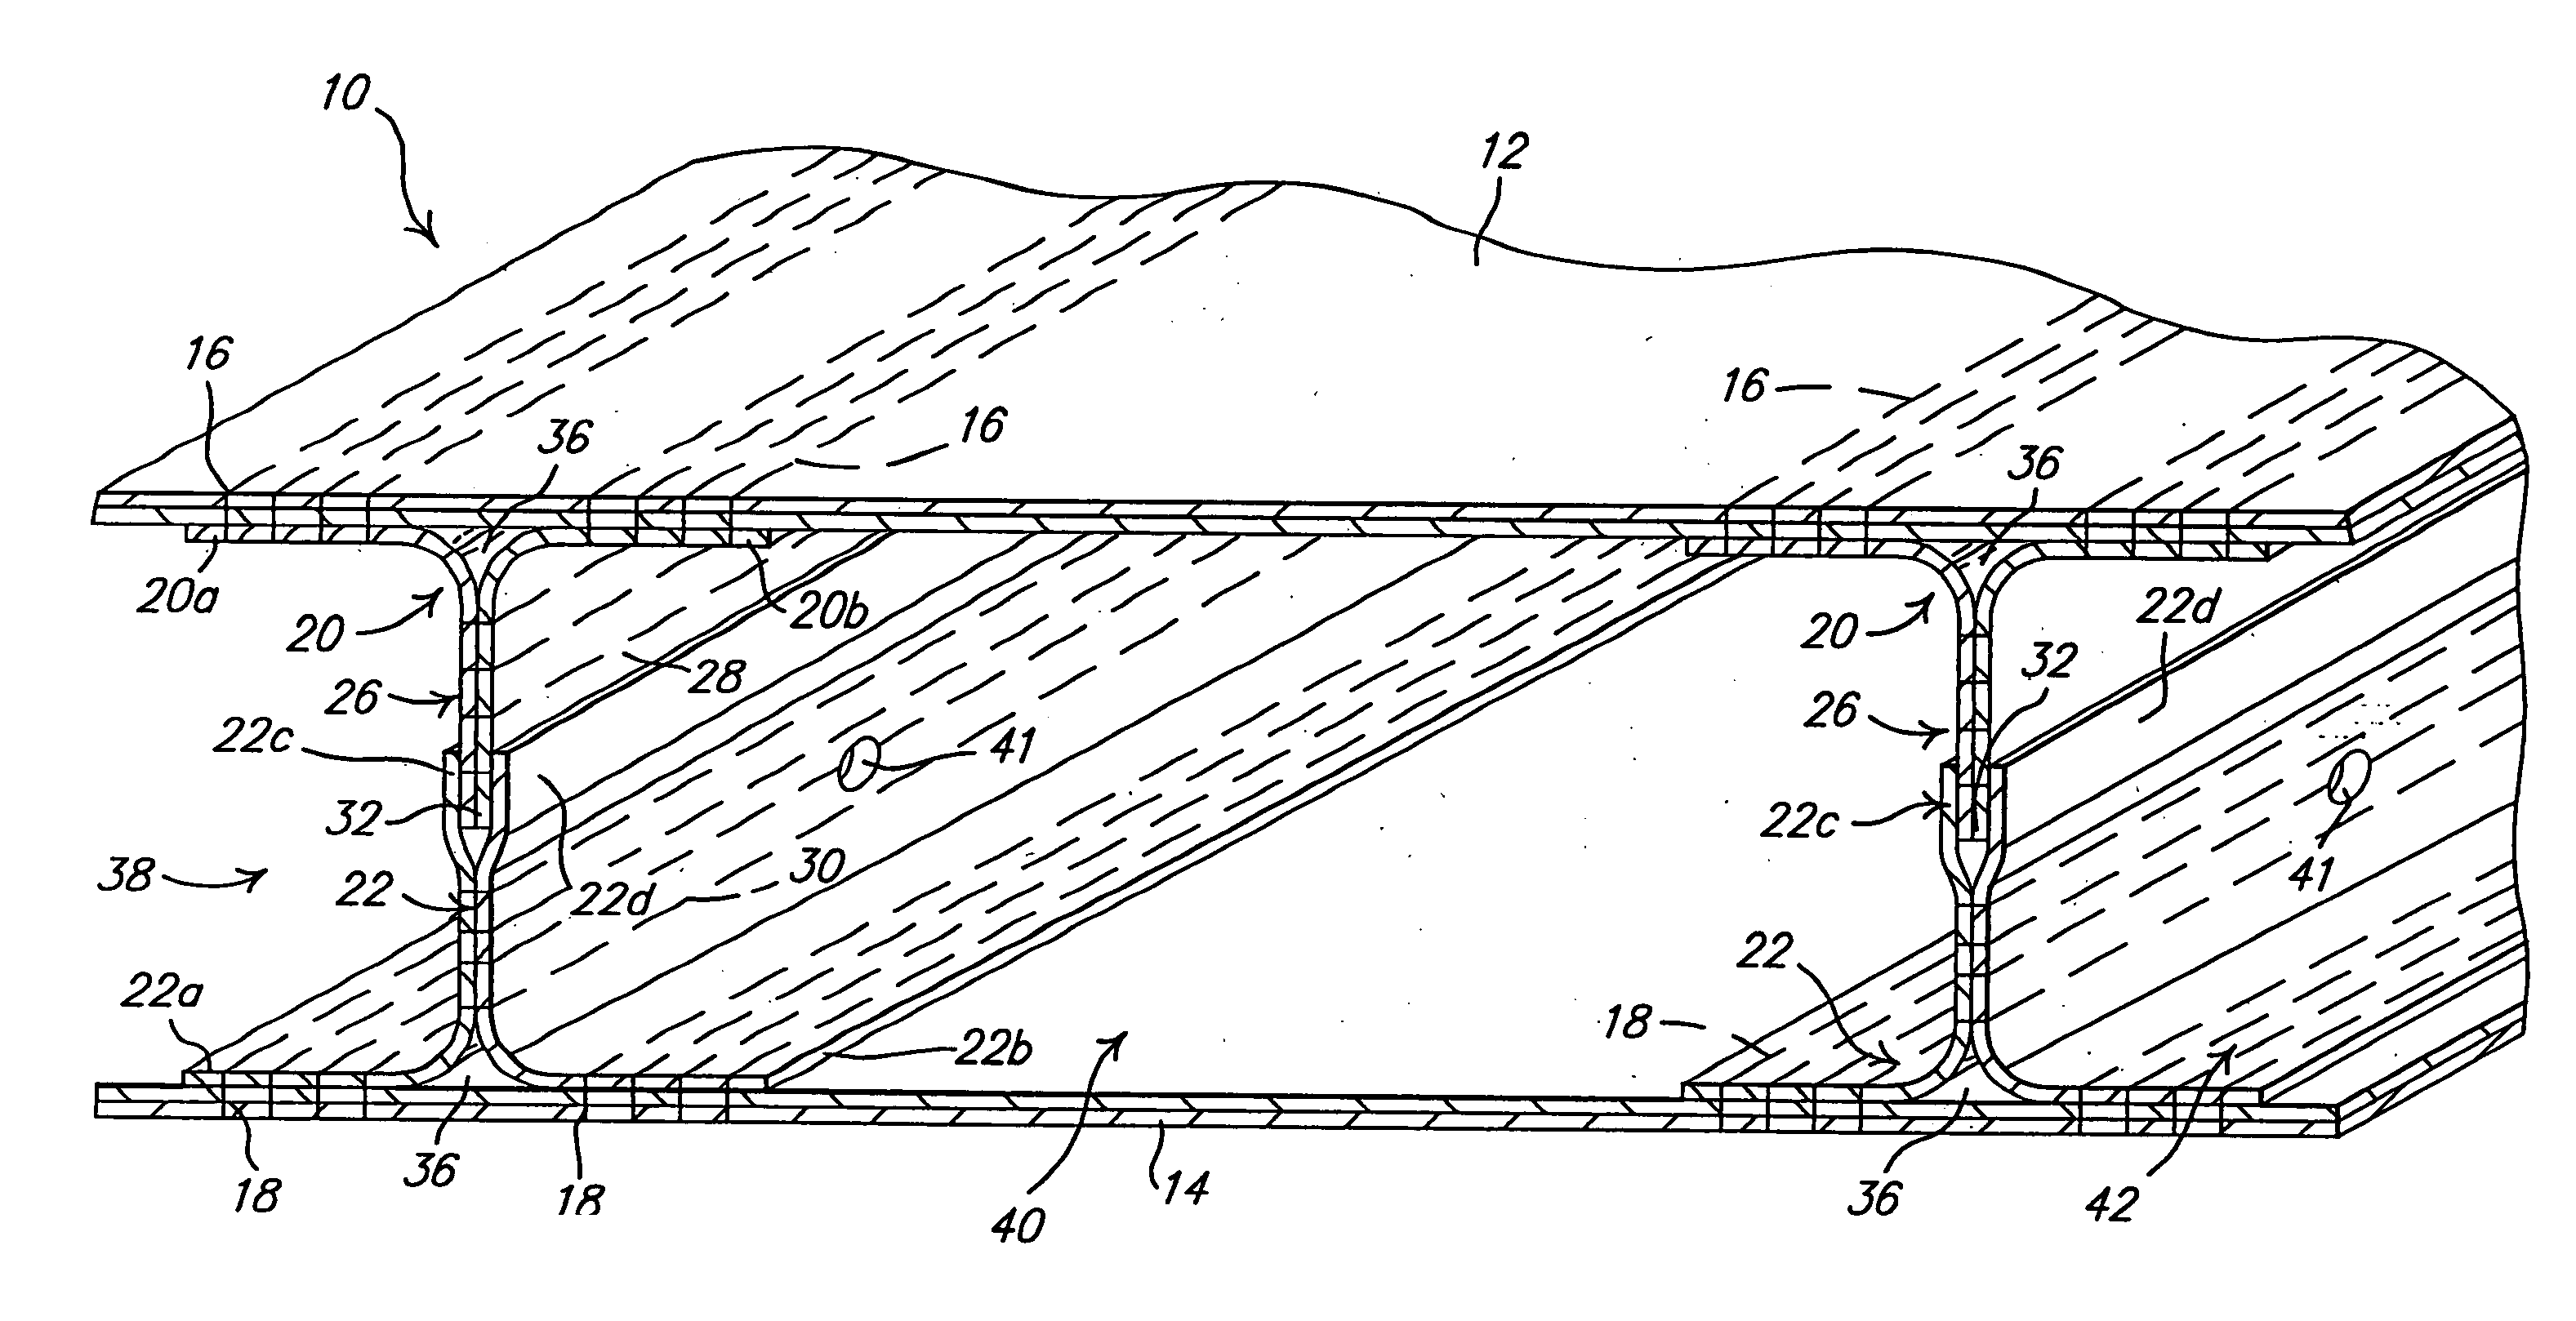 Molding process and apparatus for producing unified composite structures